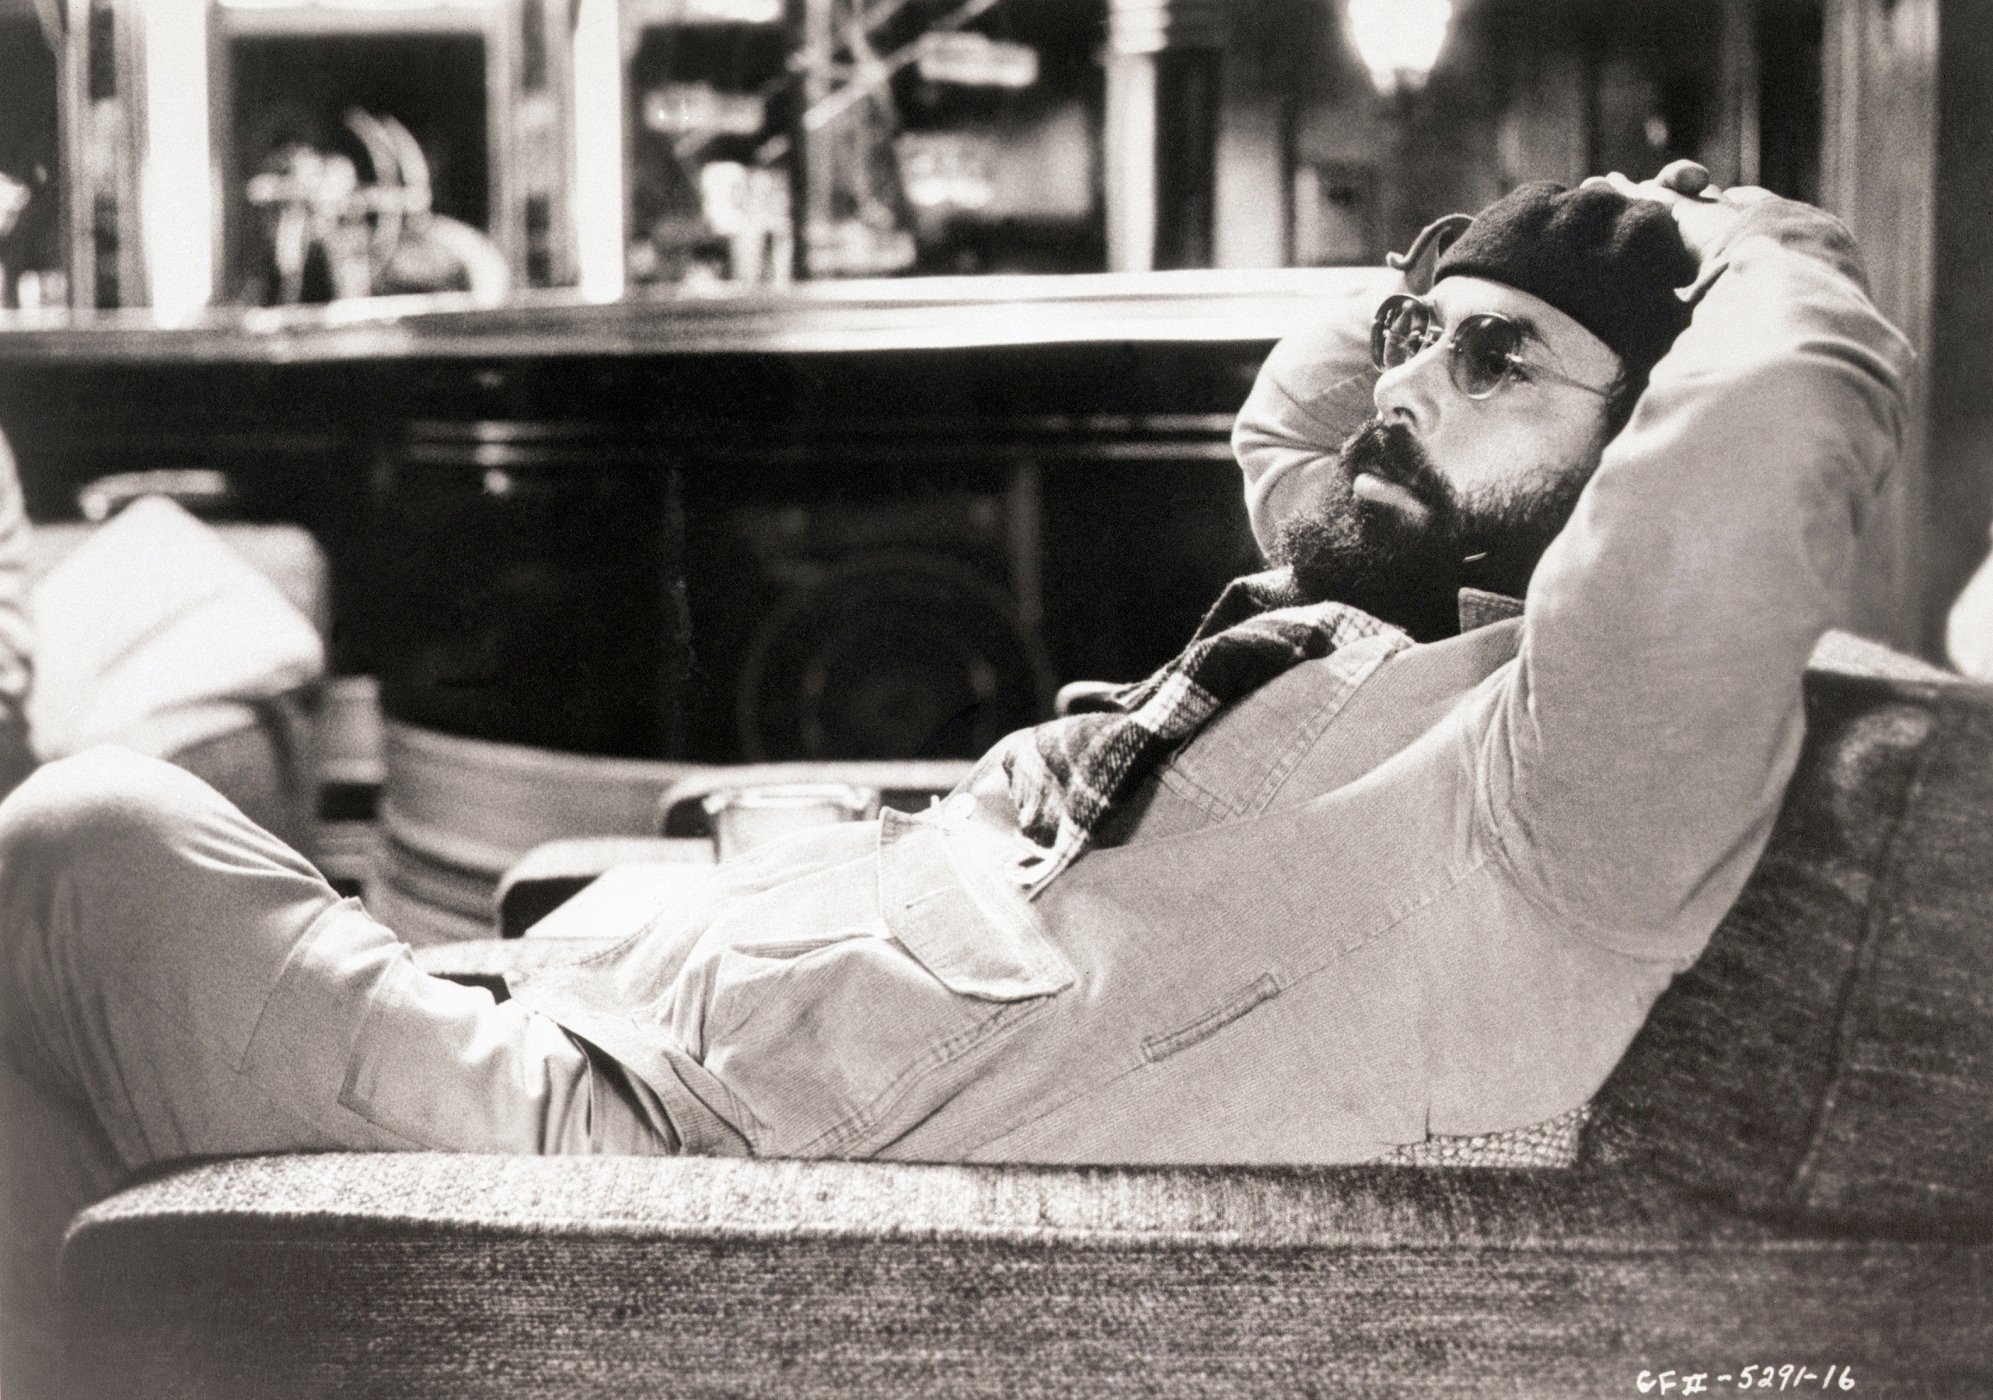 Francis Ford Coppola relaxes on the set of "The Godfather" in 1974